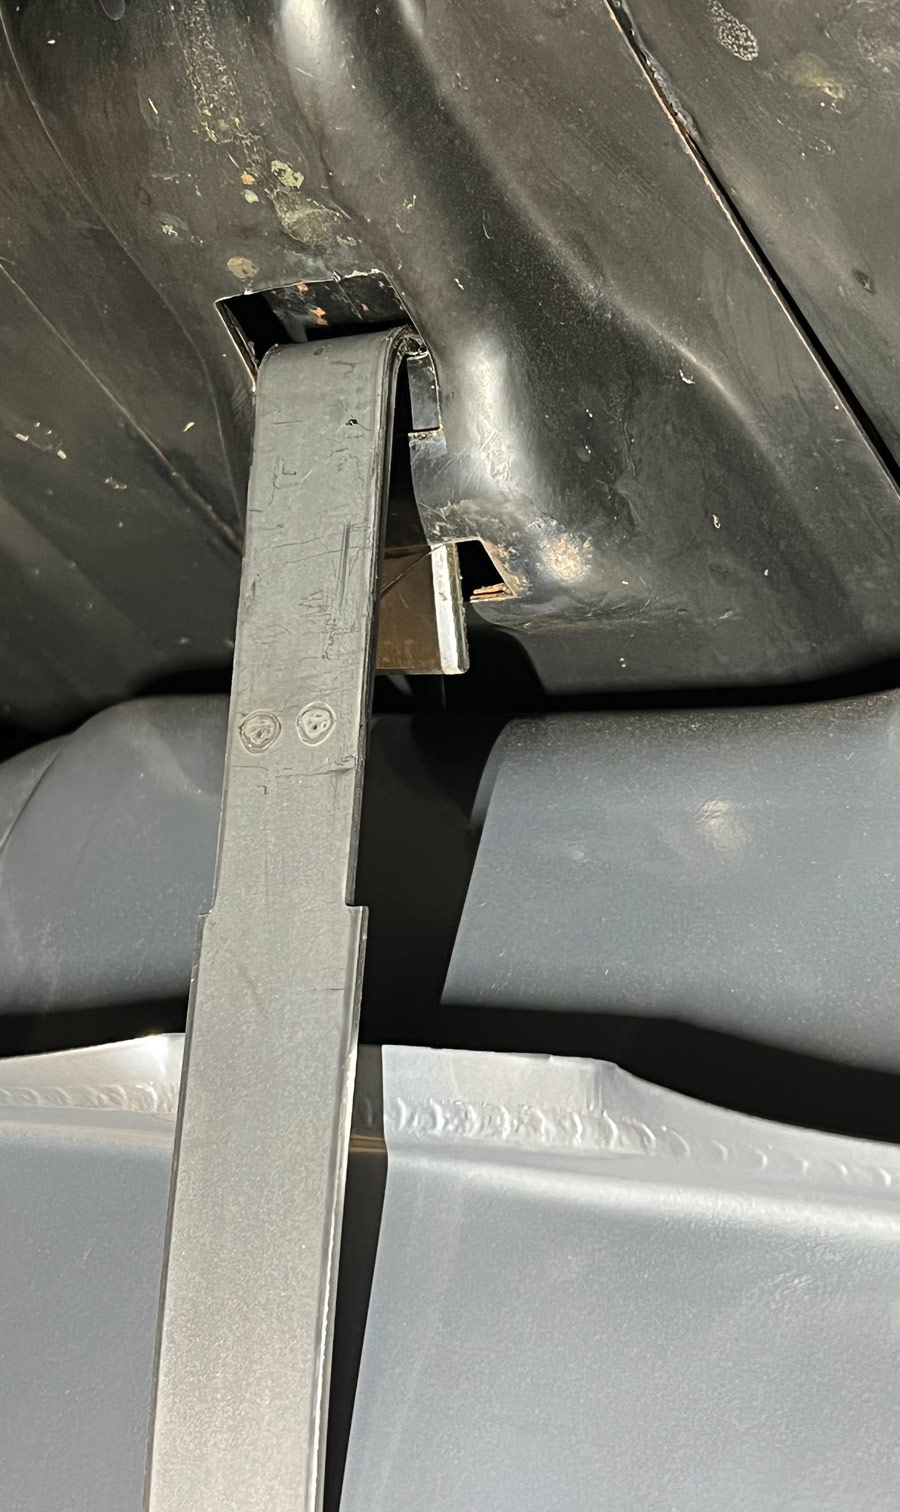 CPP provides a pair of new lengthened straps that attach in the rear position